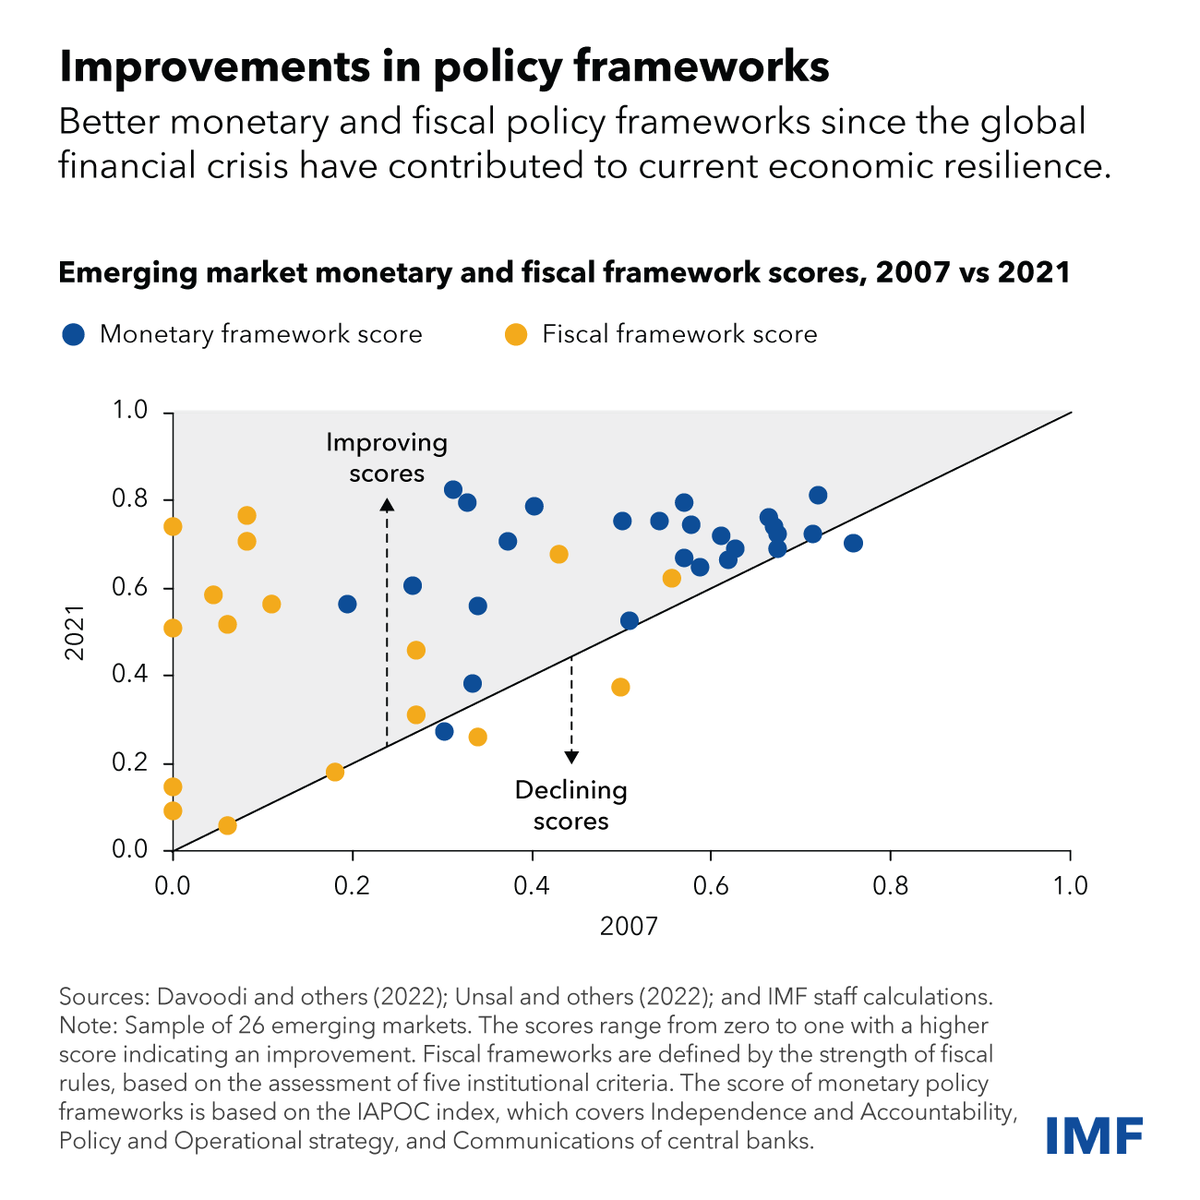 To strengthen medium-term prospects, policymakers should: – Gradually reduce debt – Implement structural reforms - Continue to improve policy frameworks – Promote global trade integration – Invest in climate & digitalization More in my blog. (6/6) imf.org/en/Blogs/Artic…